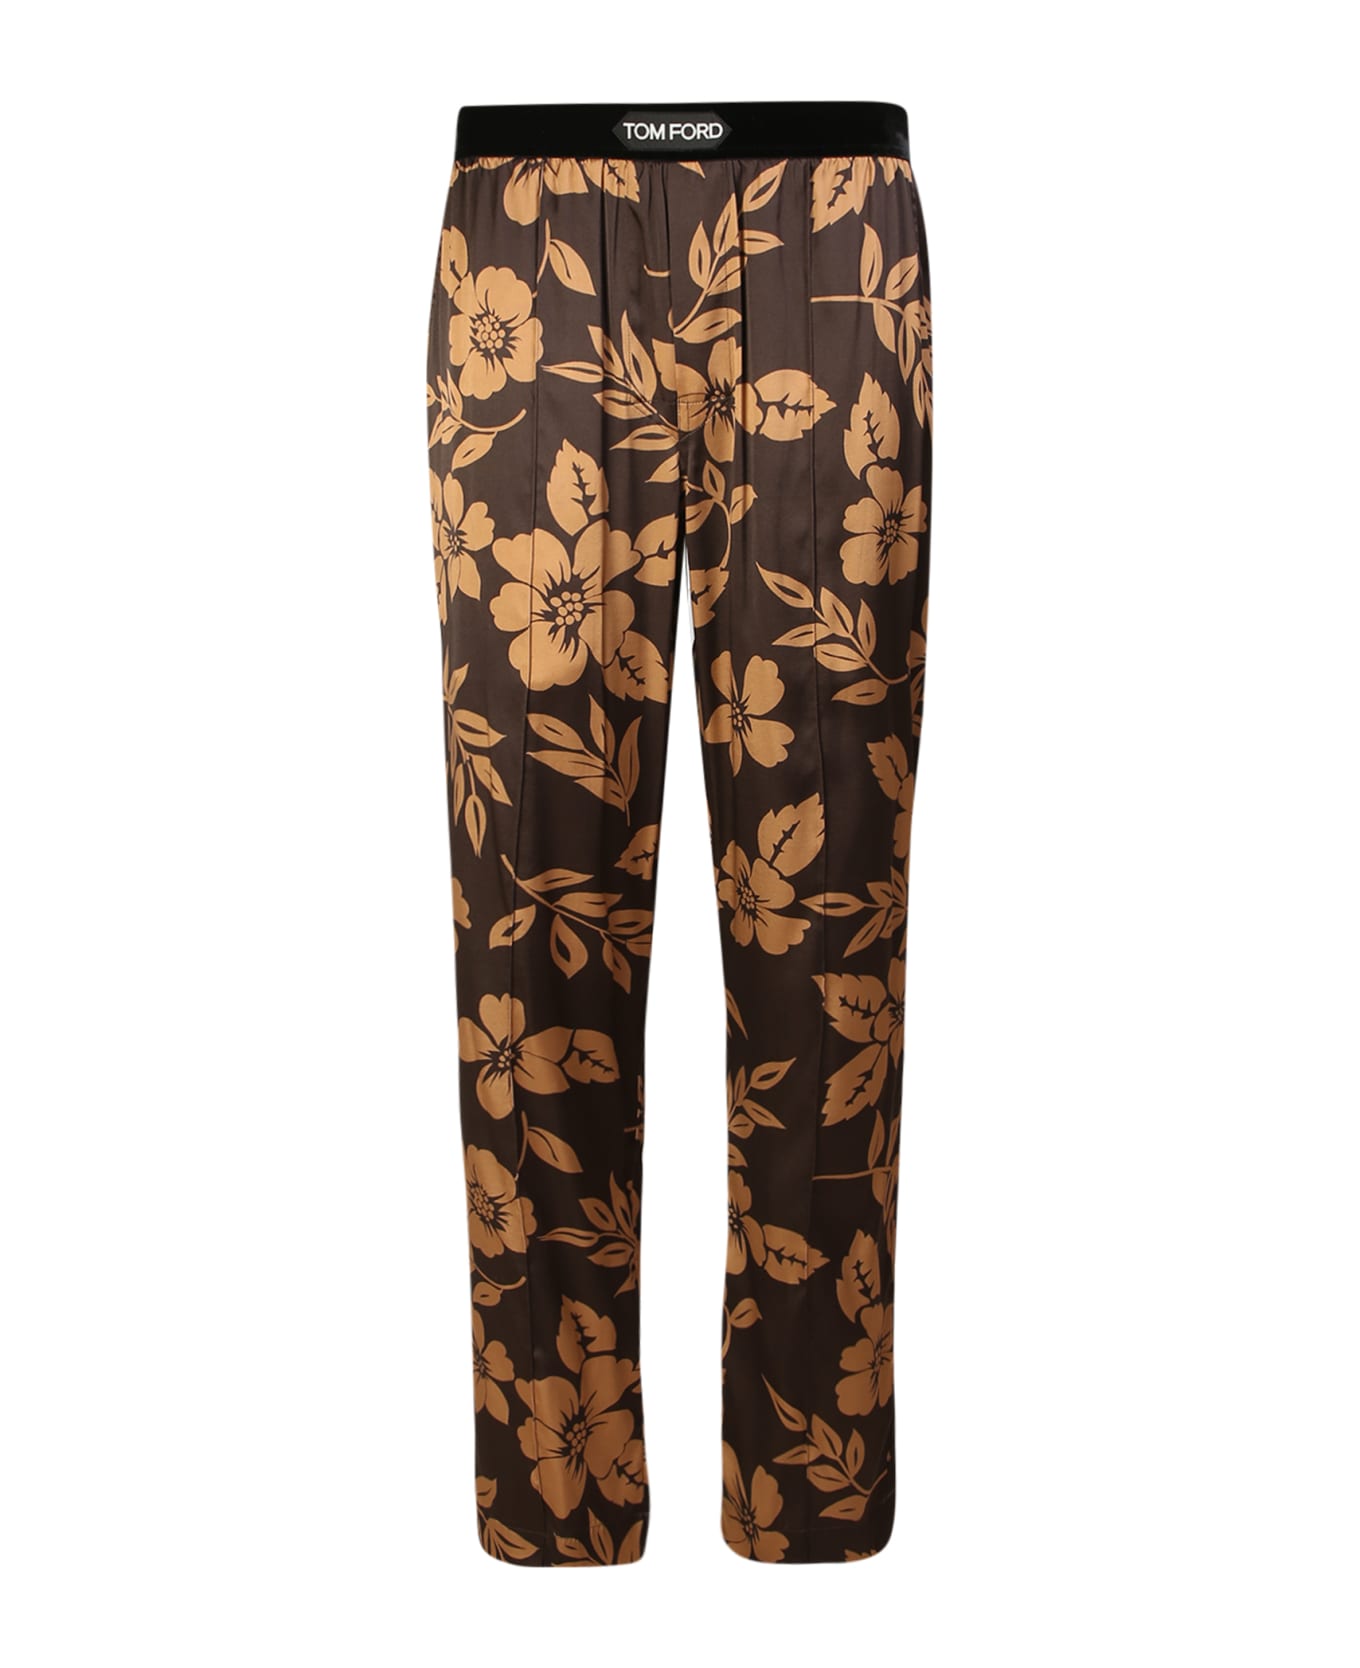 Tom Ford Multicolor Flower Trousers - Brown ボトムス